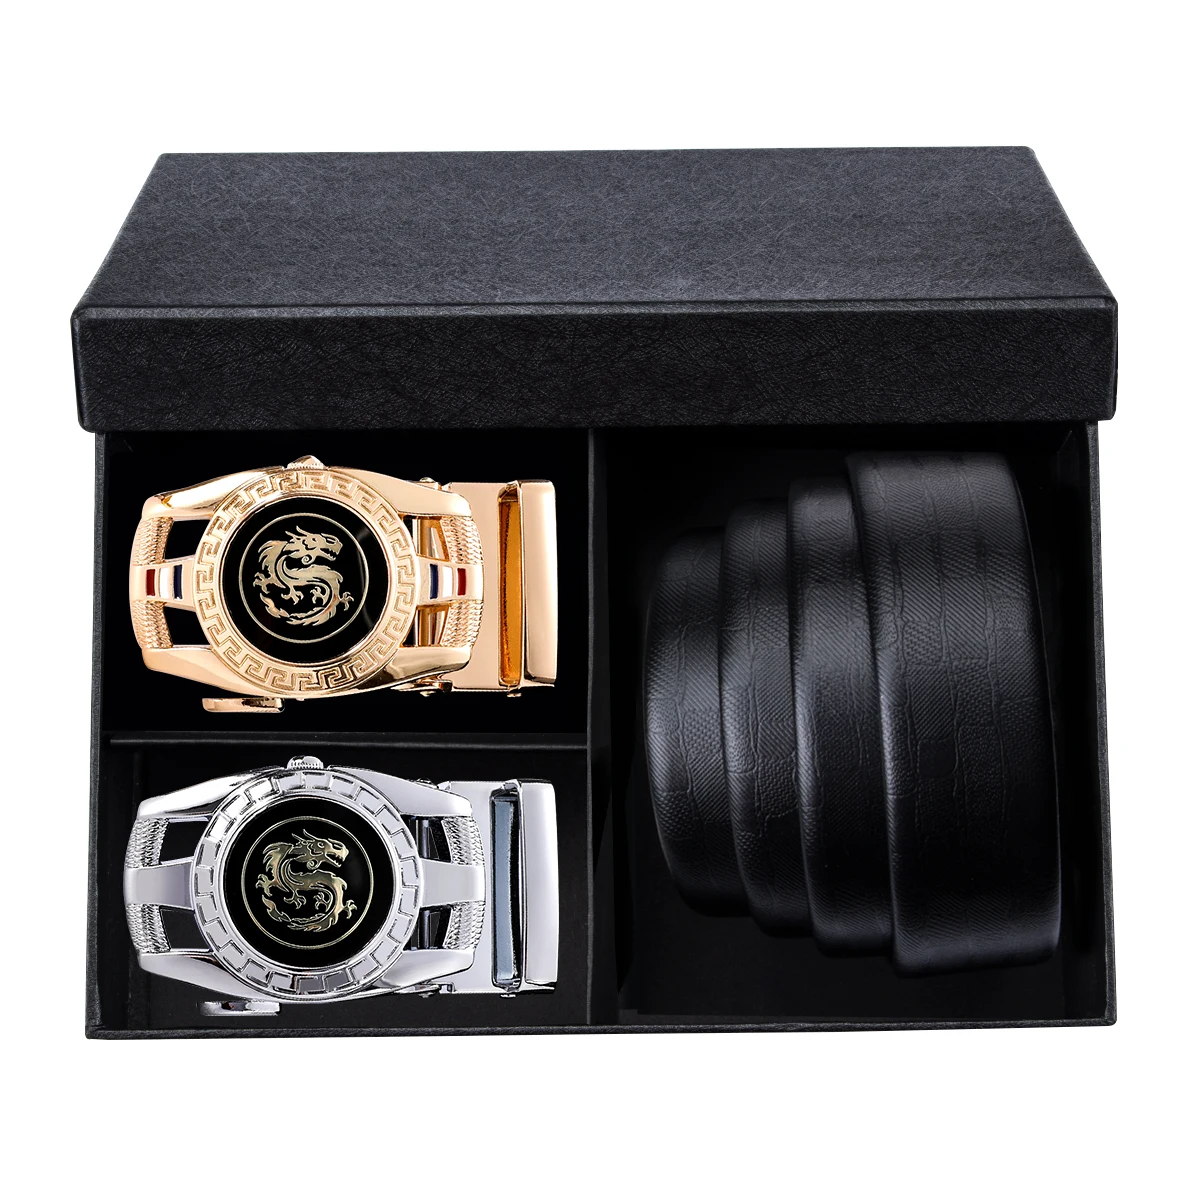 Luxury Mens Belts in Gift Box Brand Leather Ratchet Black Belt with 2 Alloy Automatic Buckles 3.5cm Wide Adjustable Waistband 